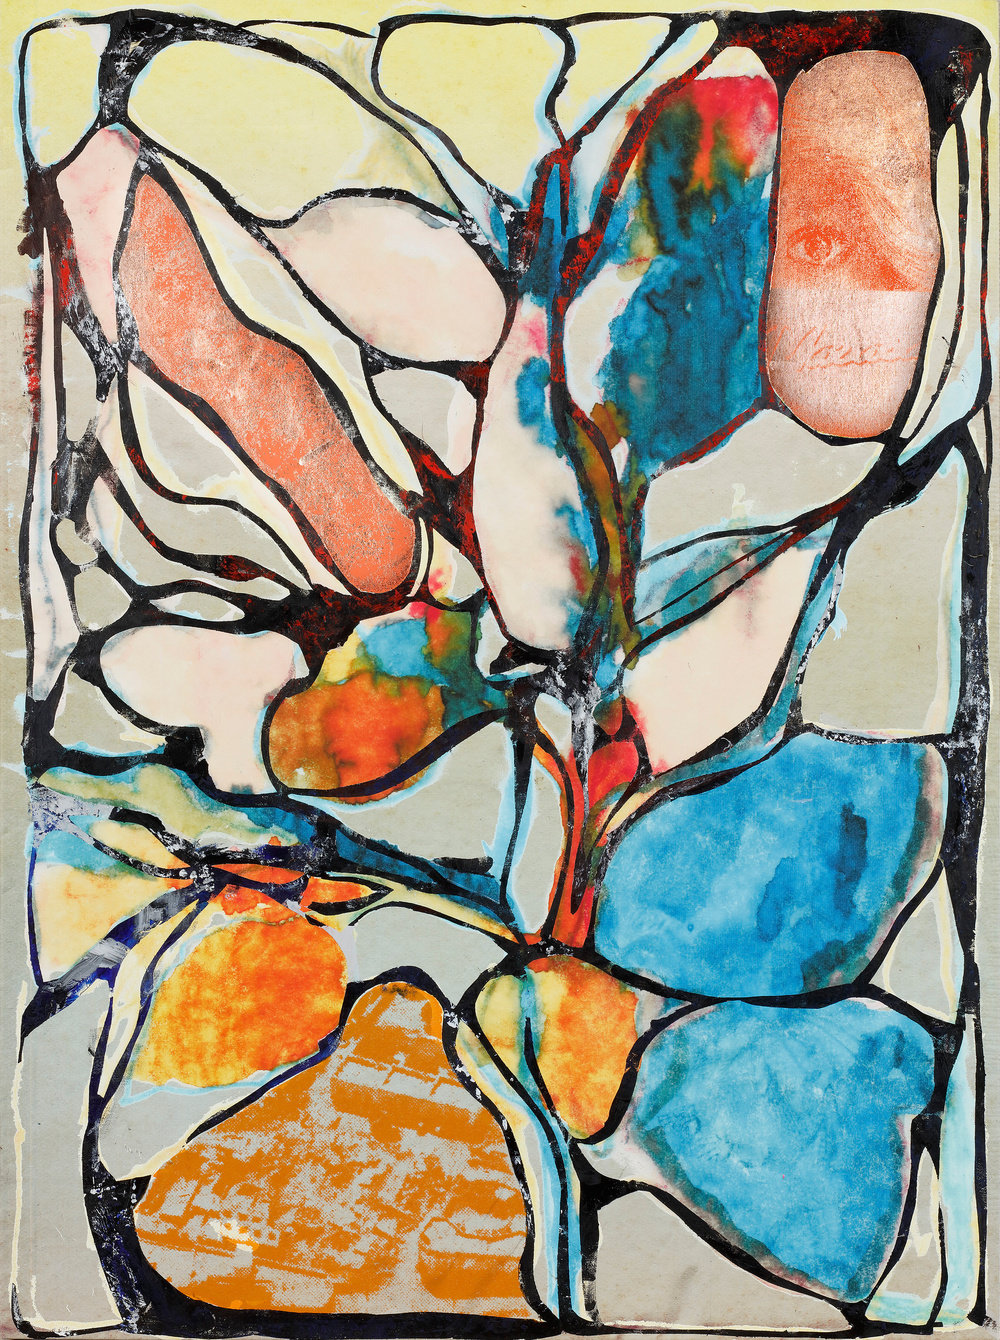 Freeman and lowe, hard water fetish, 2019, encaustic wax, copper leaf, silkscreen and ink on canvas, 29 1 4 x 39 1 8 in., 74.3 x 99.4 cm, 370455, v2